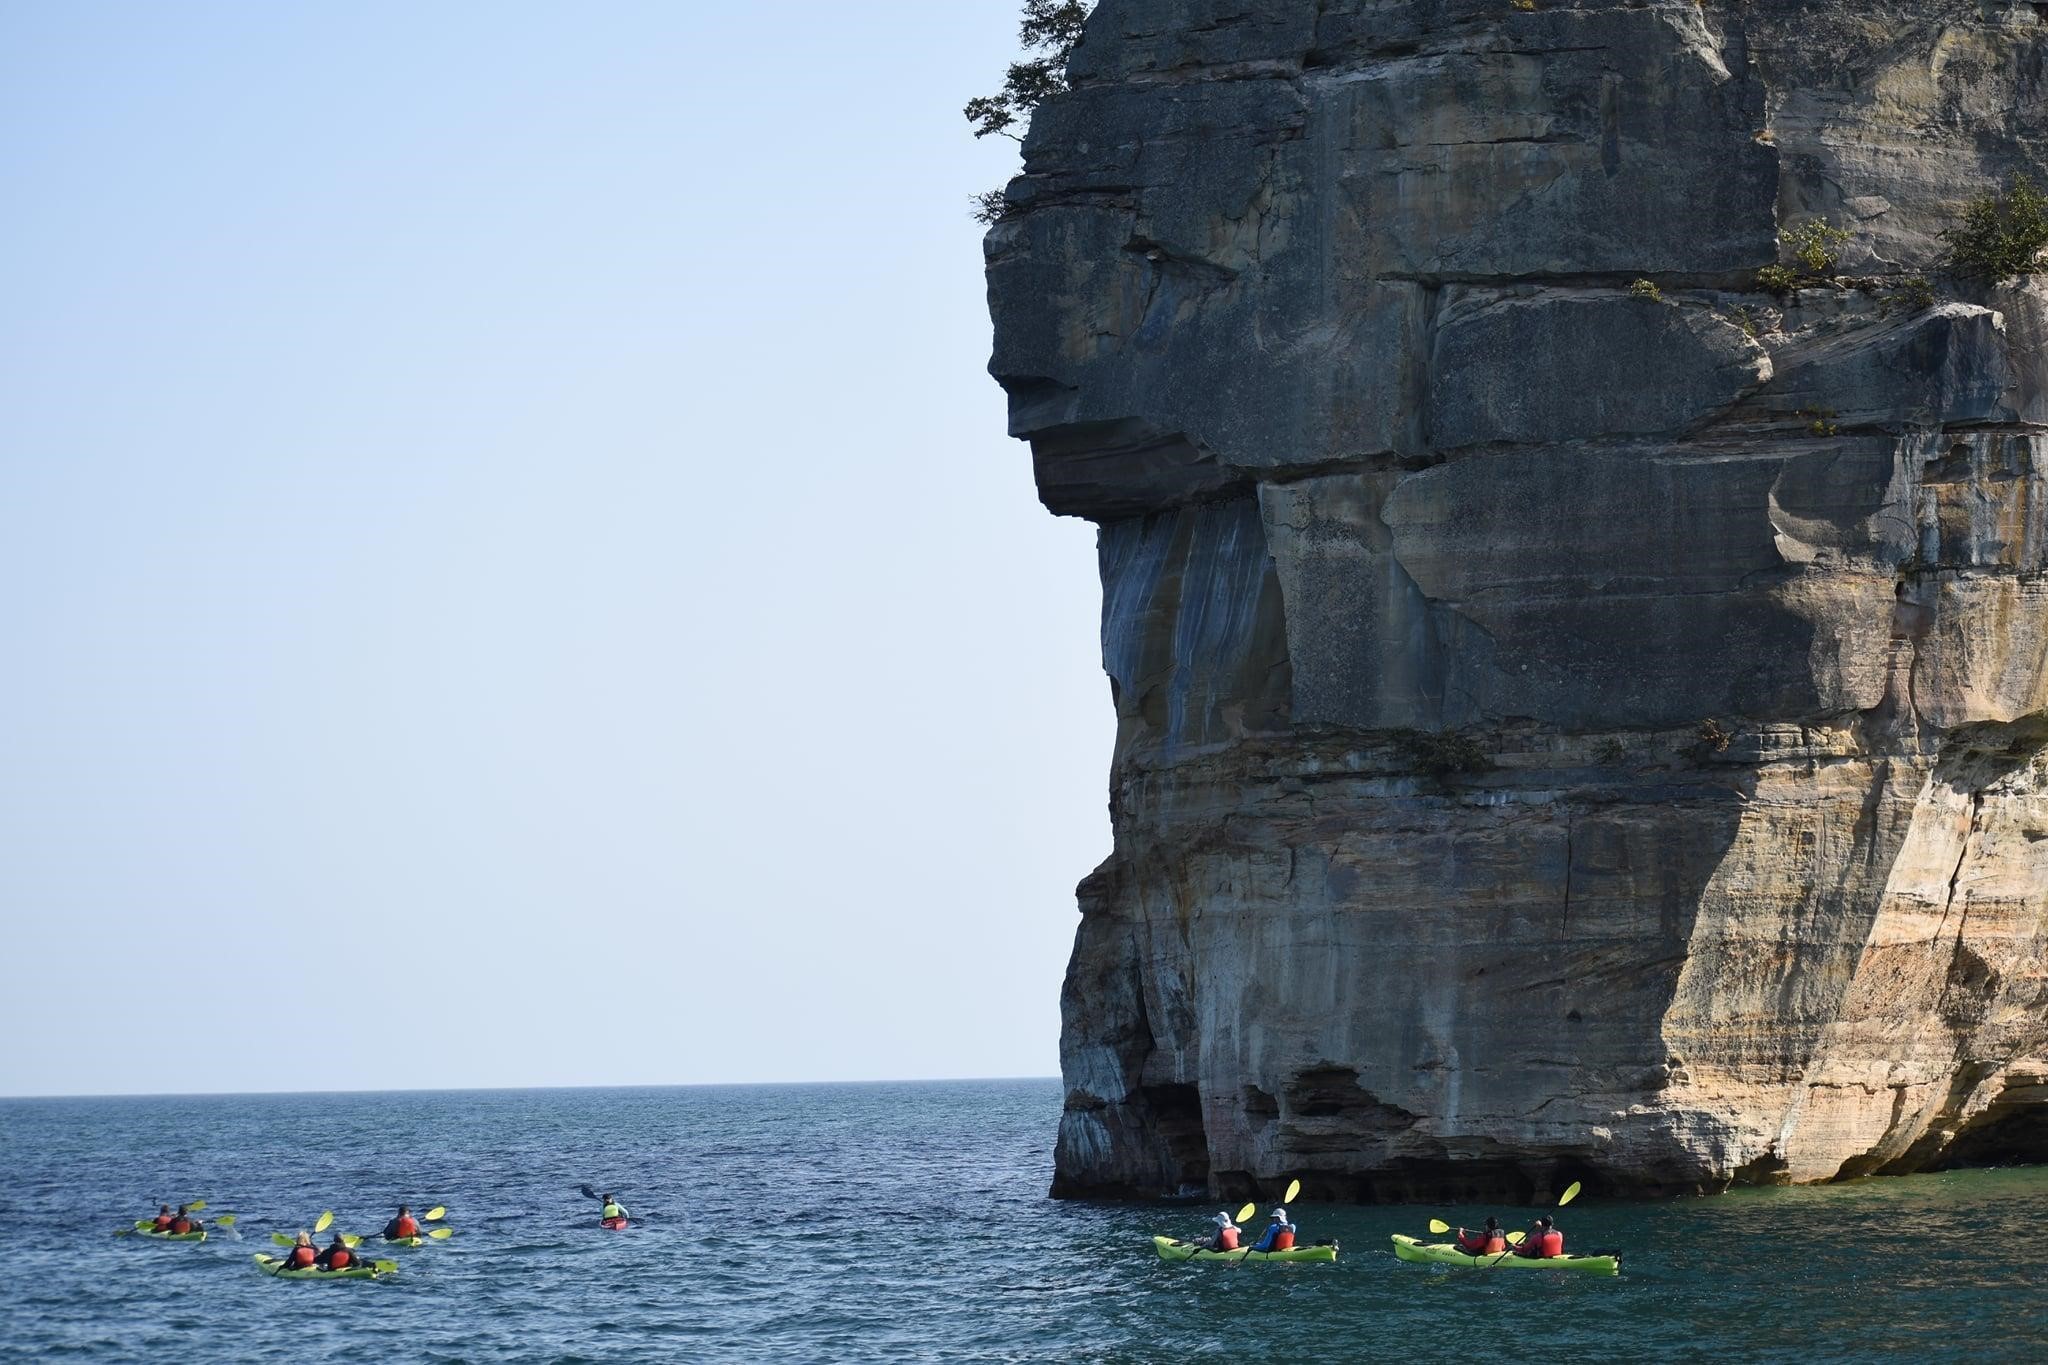 The Gift of Pictured Rocks Kayaking